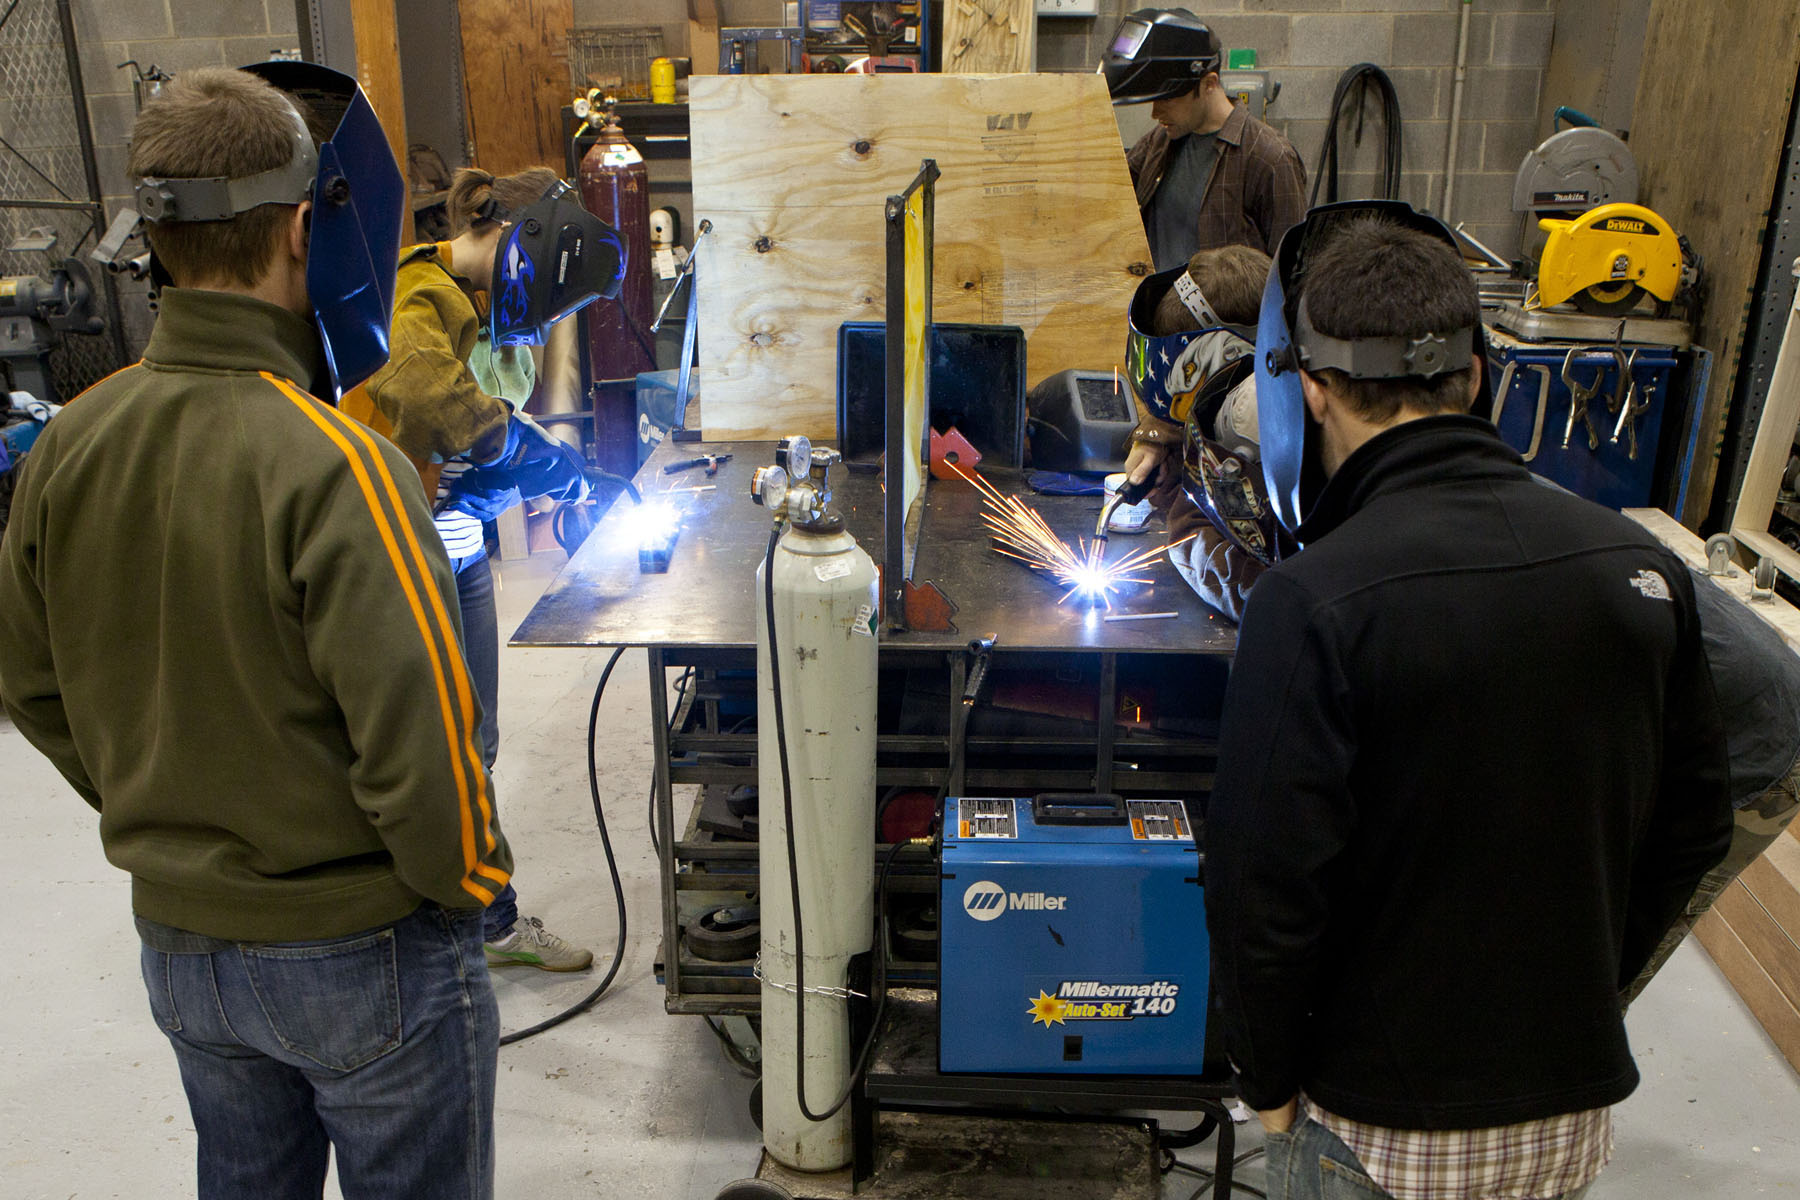 Students in a workshop practicing welding